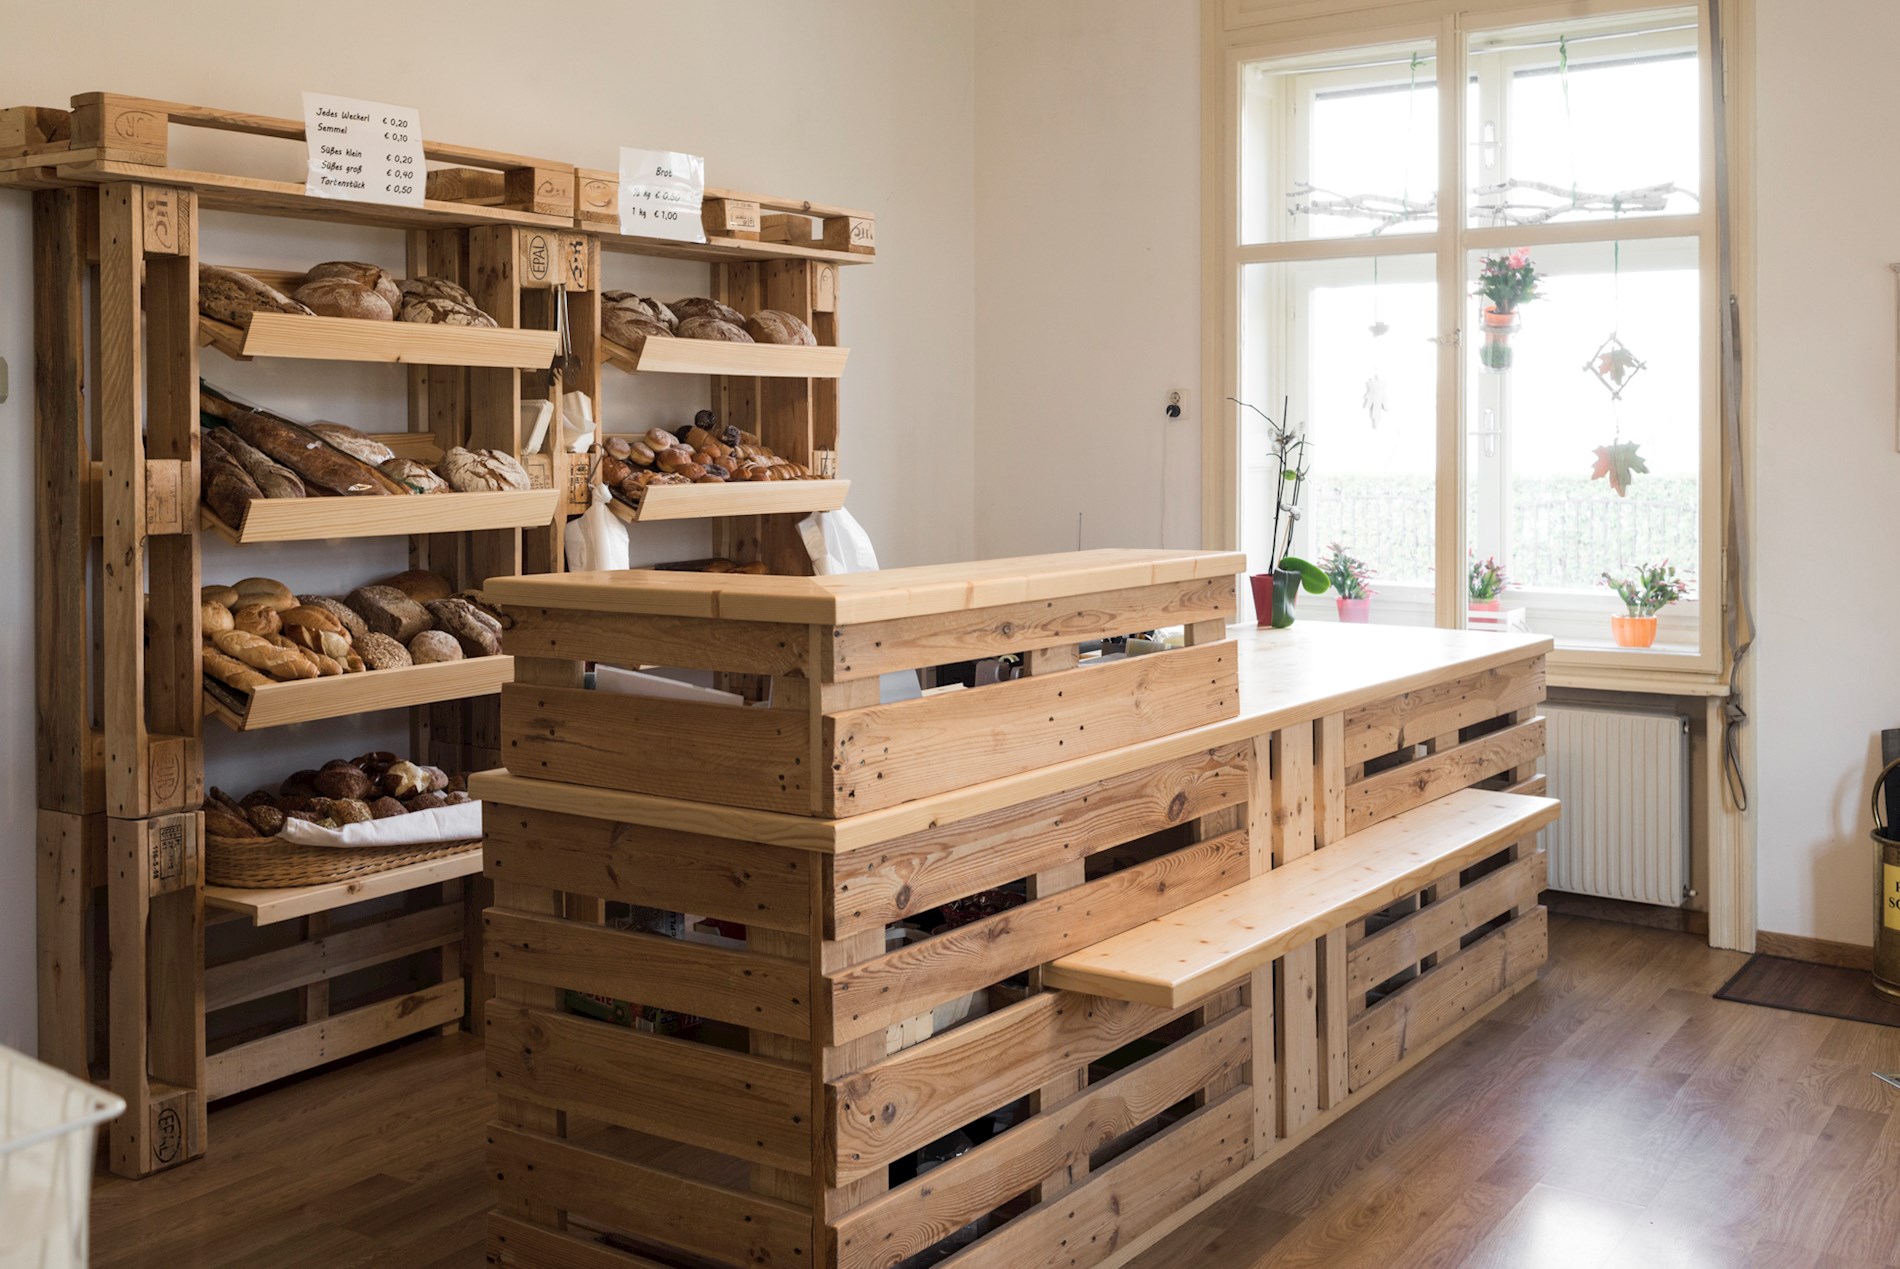 You can see beautiful, neat shelves made from wood. They are in the social supermarket in Fürstenfeld. On the shelves, there is fresh bread and pastry.